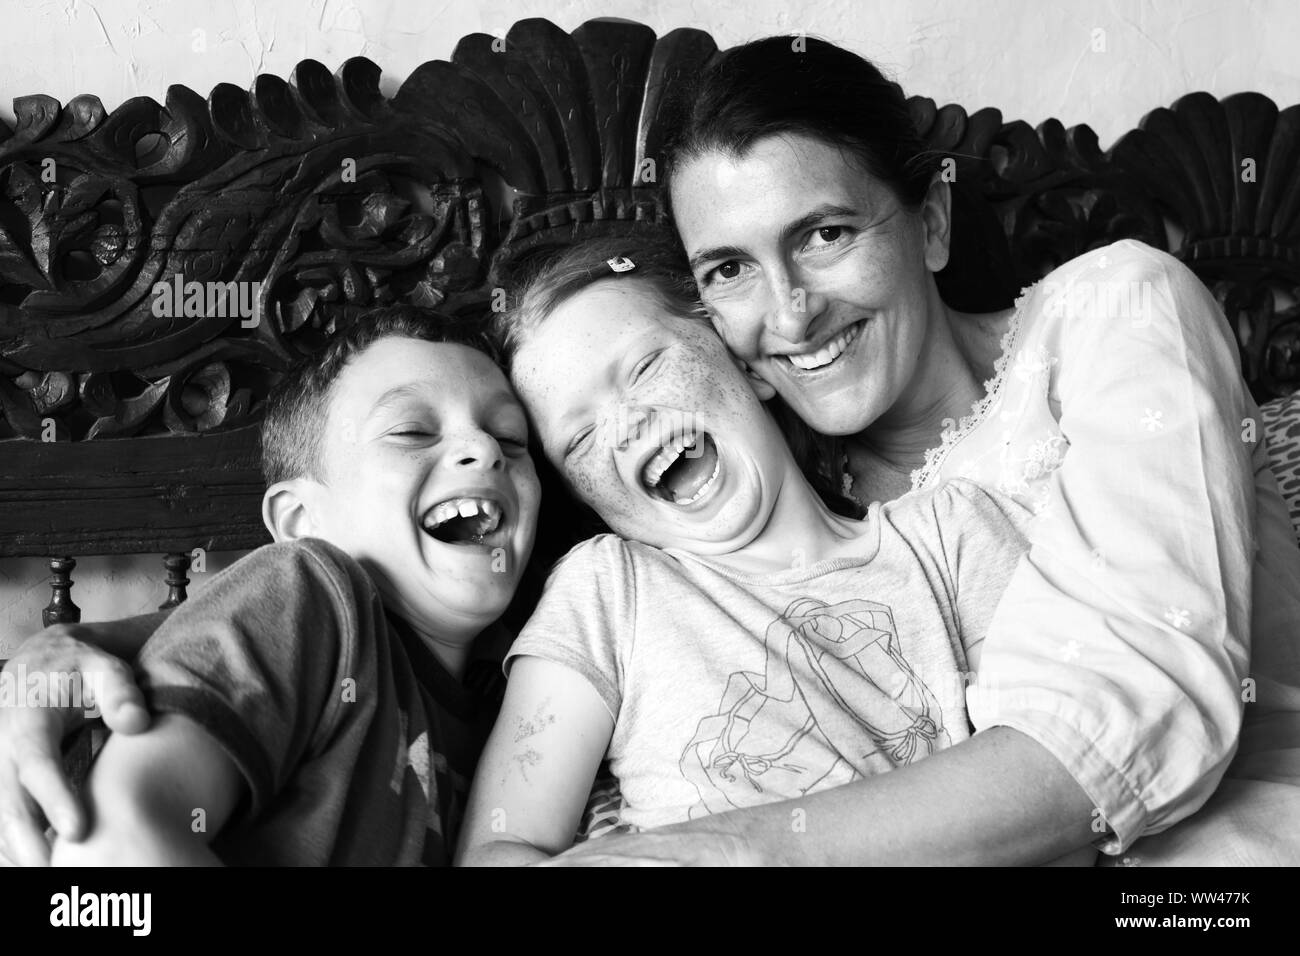 A laughing happy family caught in a moment of happiness in Indonesia, Bali. Stock Photo